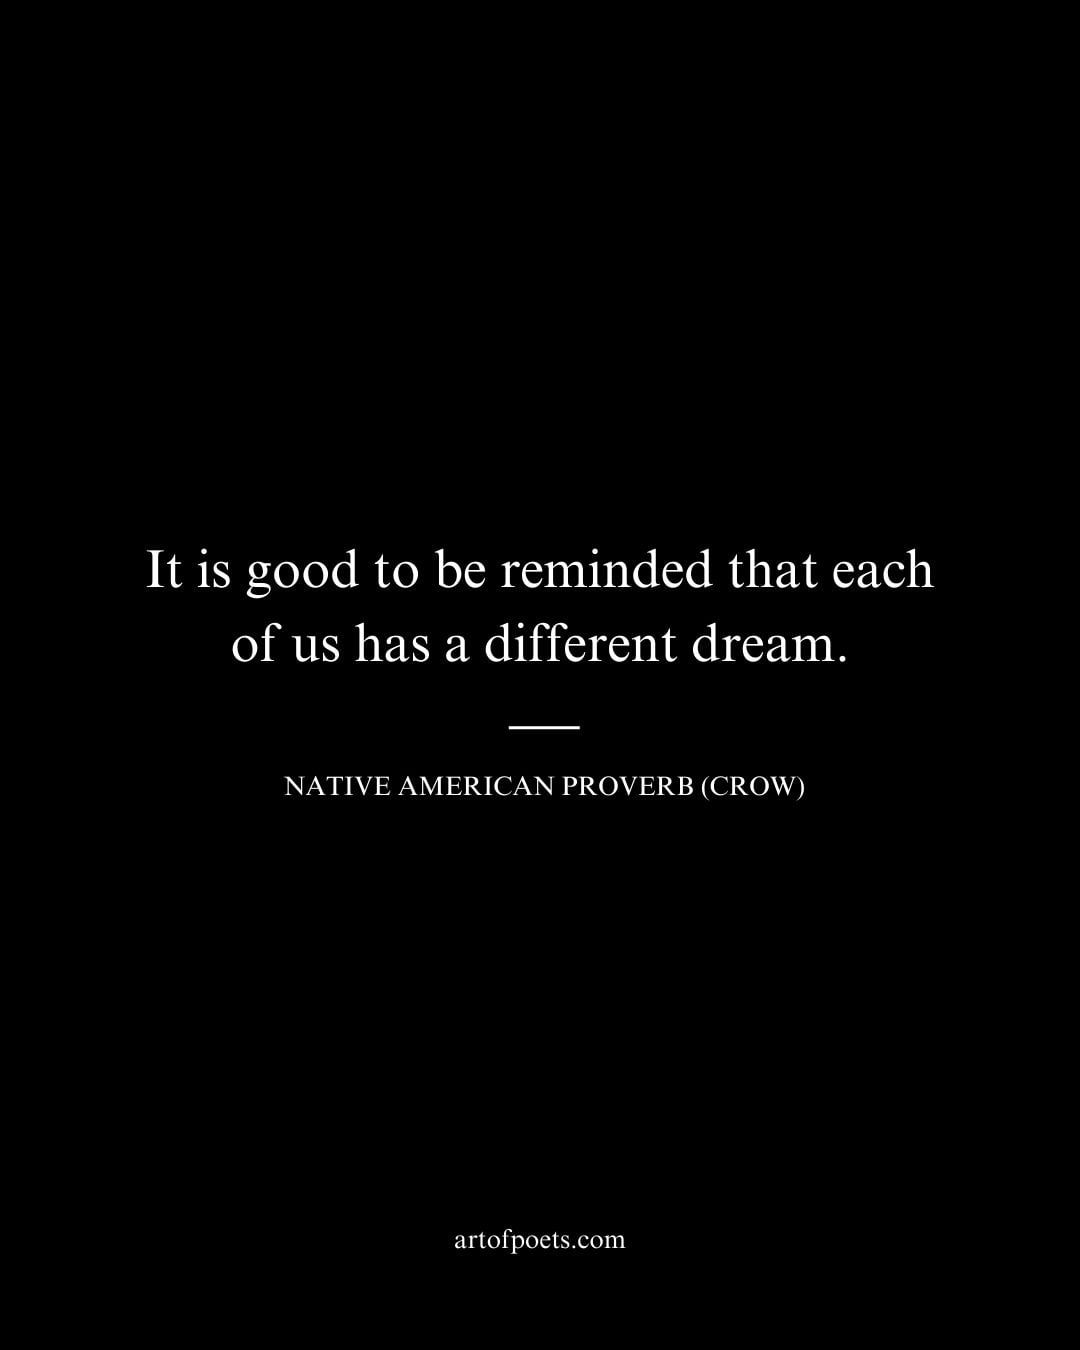 It is good to be reminded that each of us has a different dream. – Native American Proverb Crow